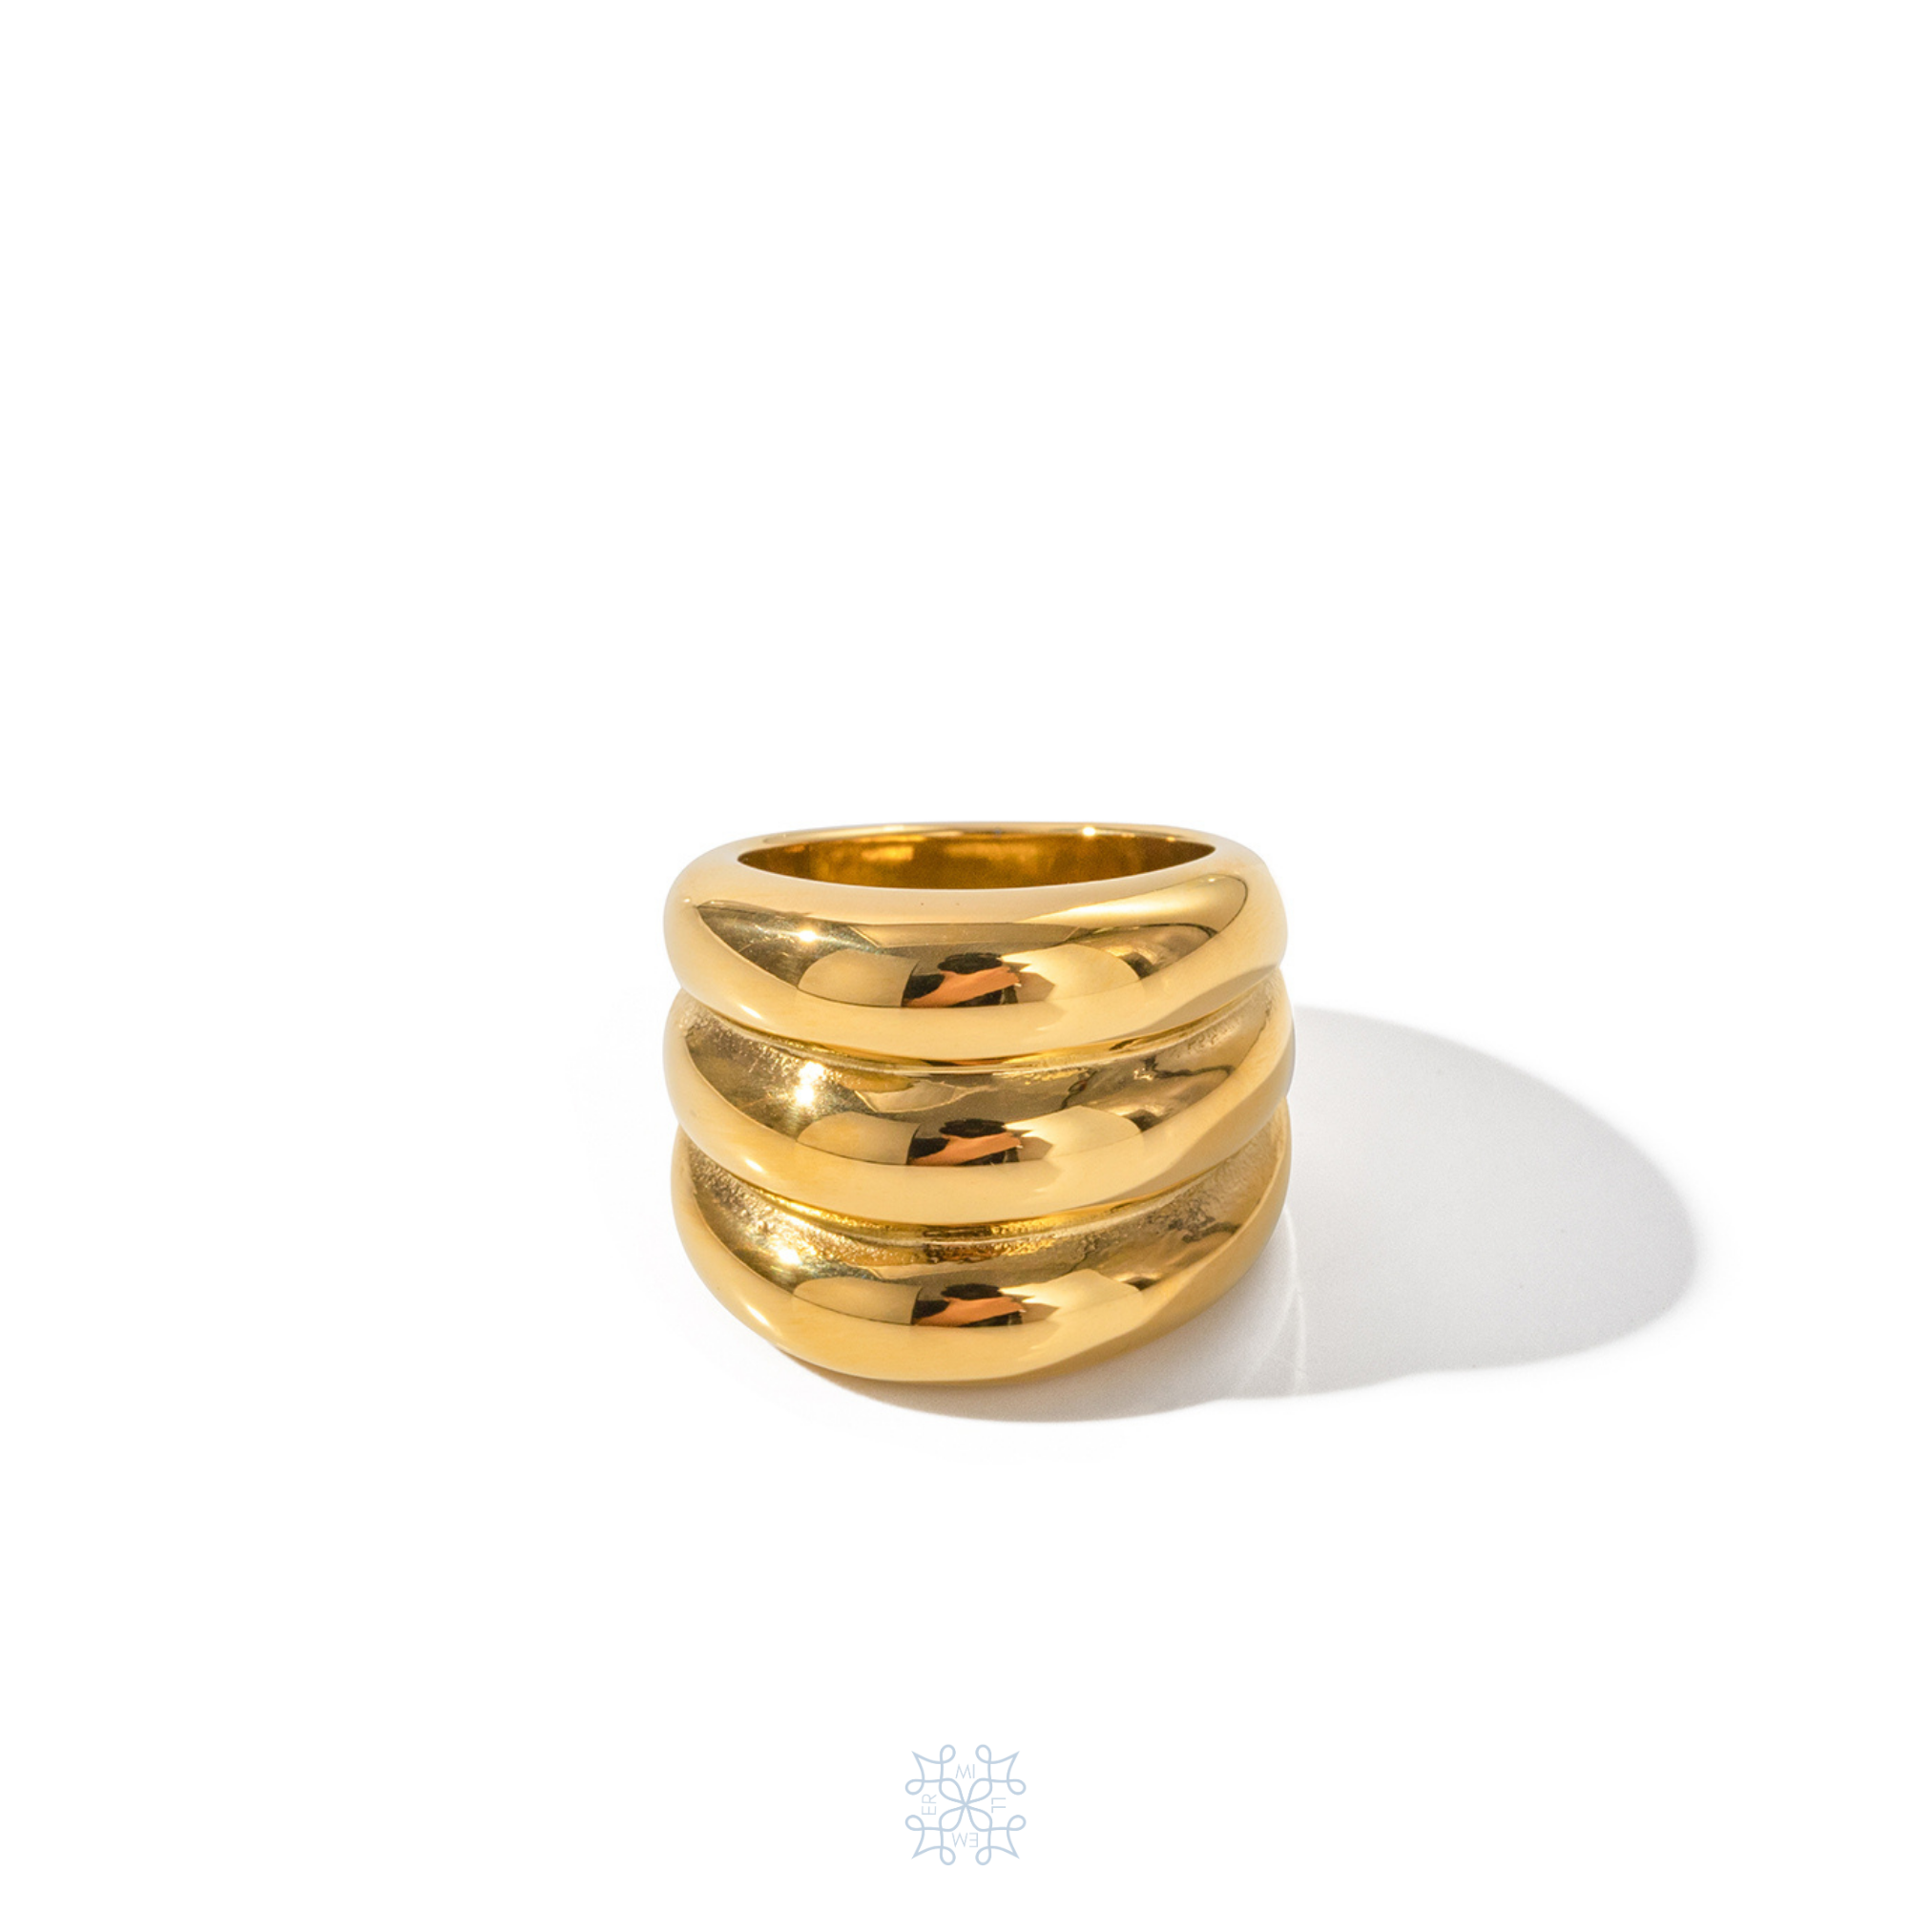 ROMA GOLD RING. Bold tall ring with 3 halo rings attached together creating a tall bold ring.